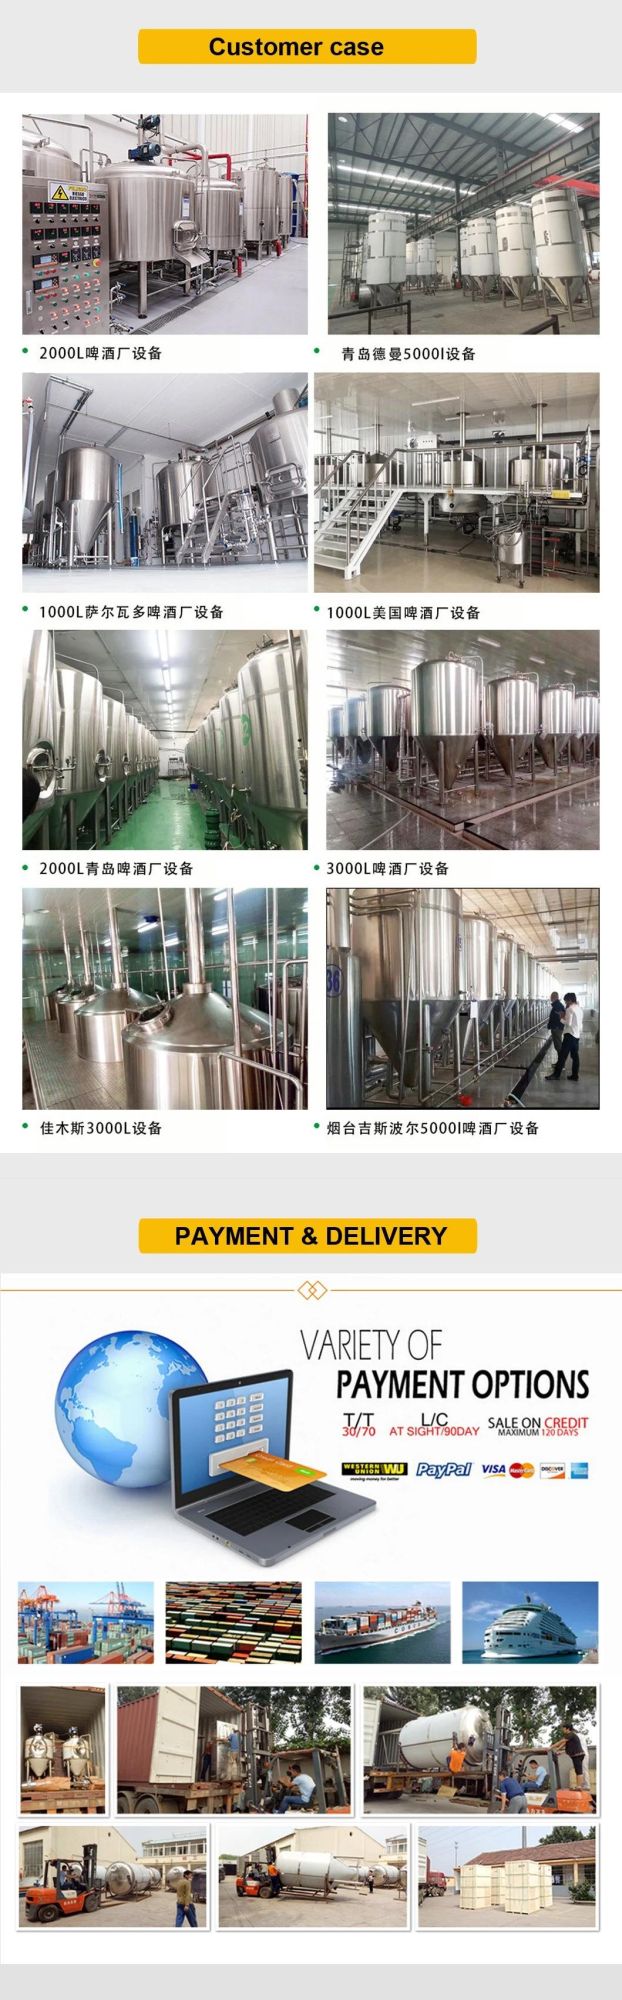 SUS304 SUS316 Beer Brewing Brewhouse Equipment Turnkey System